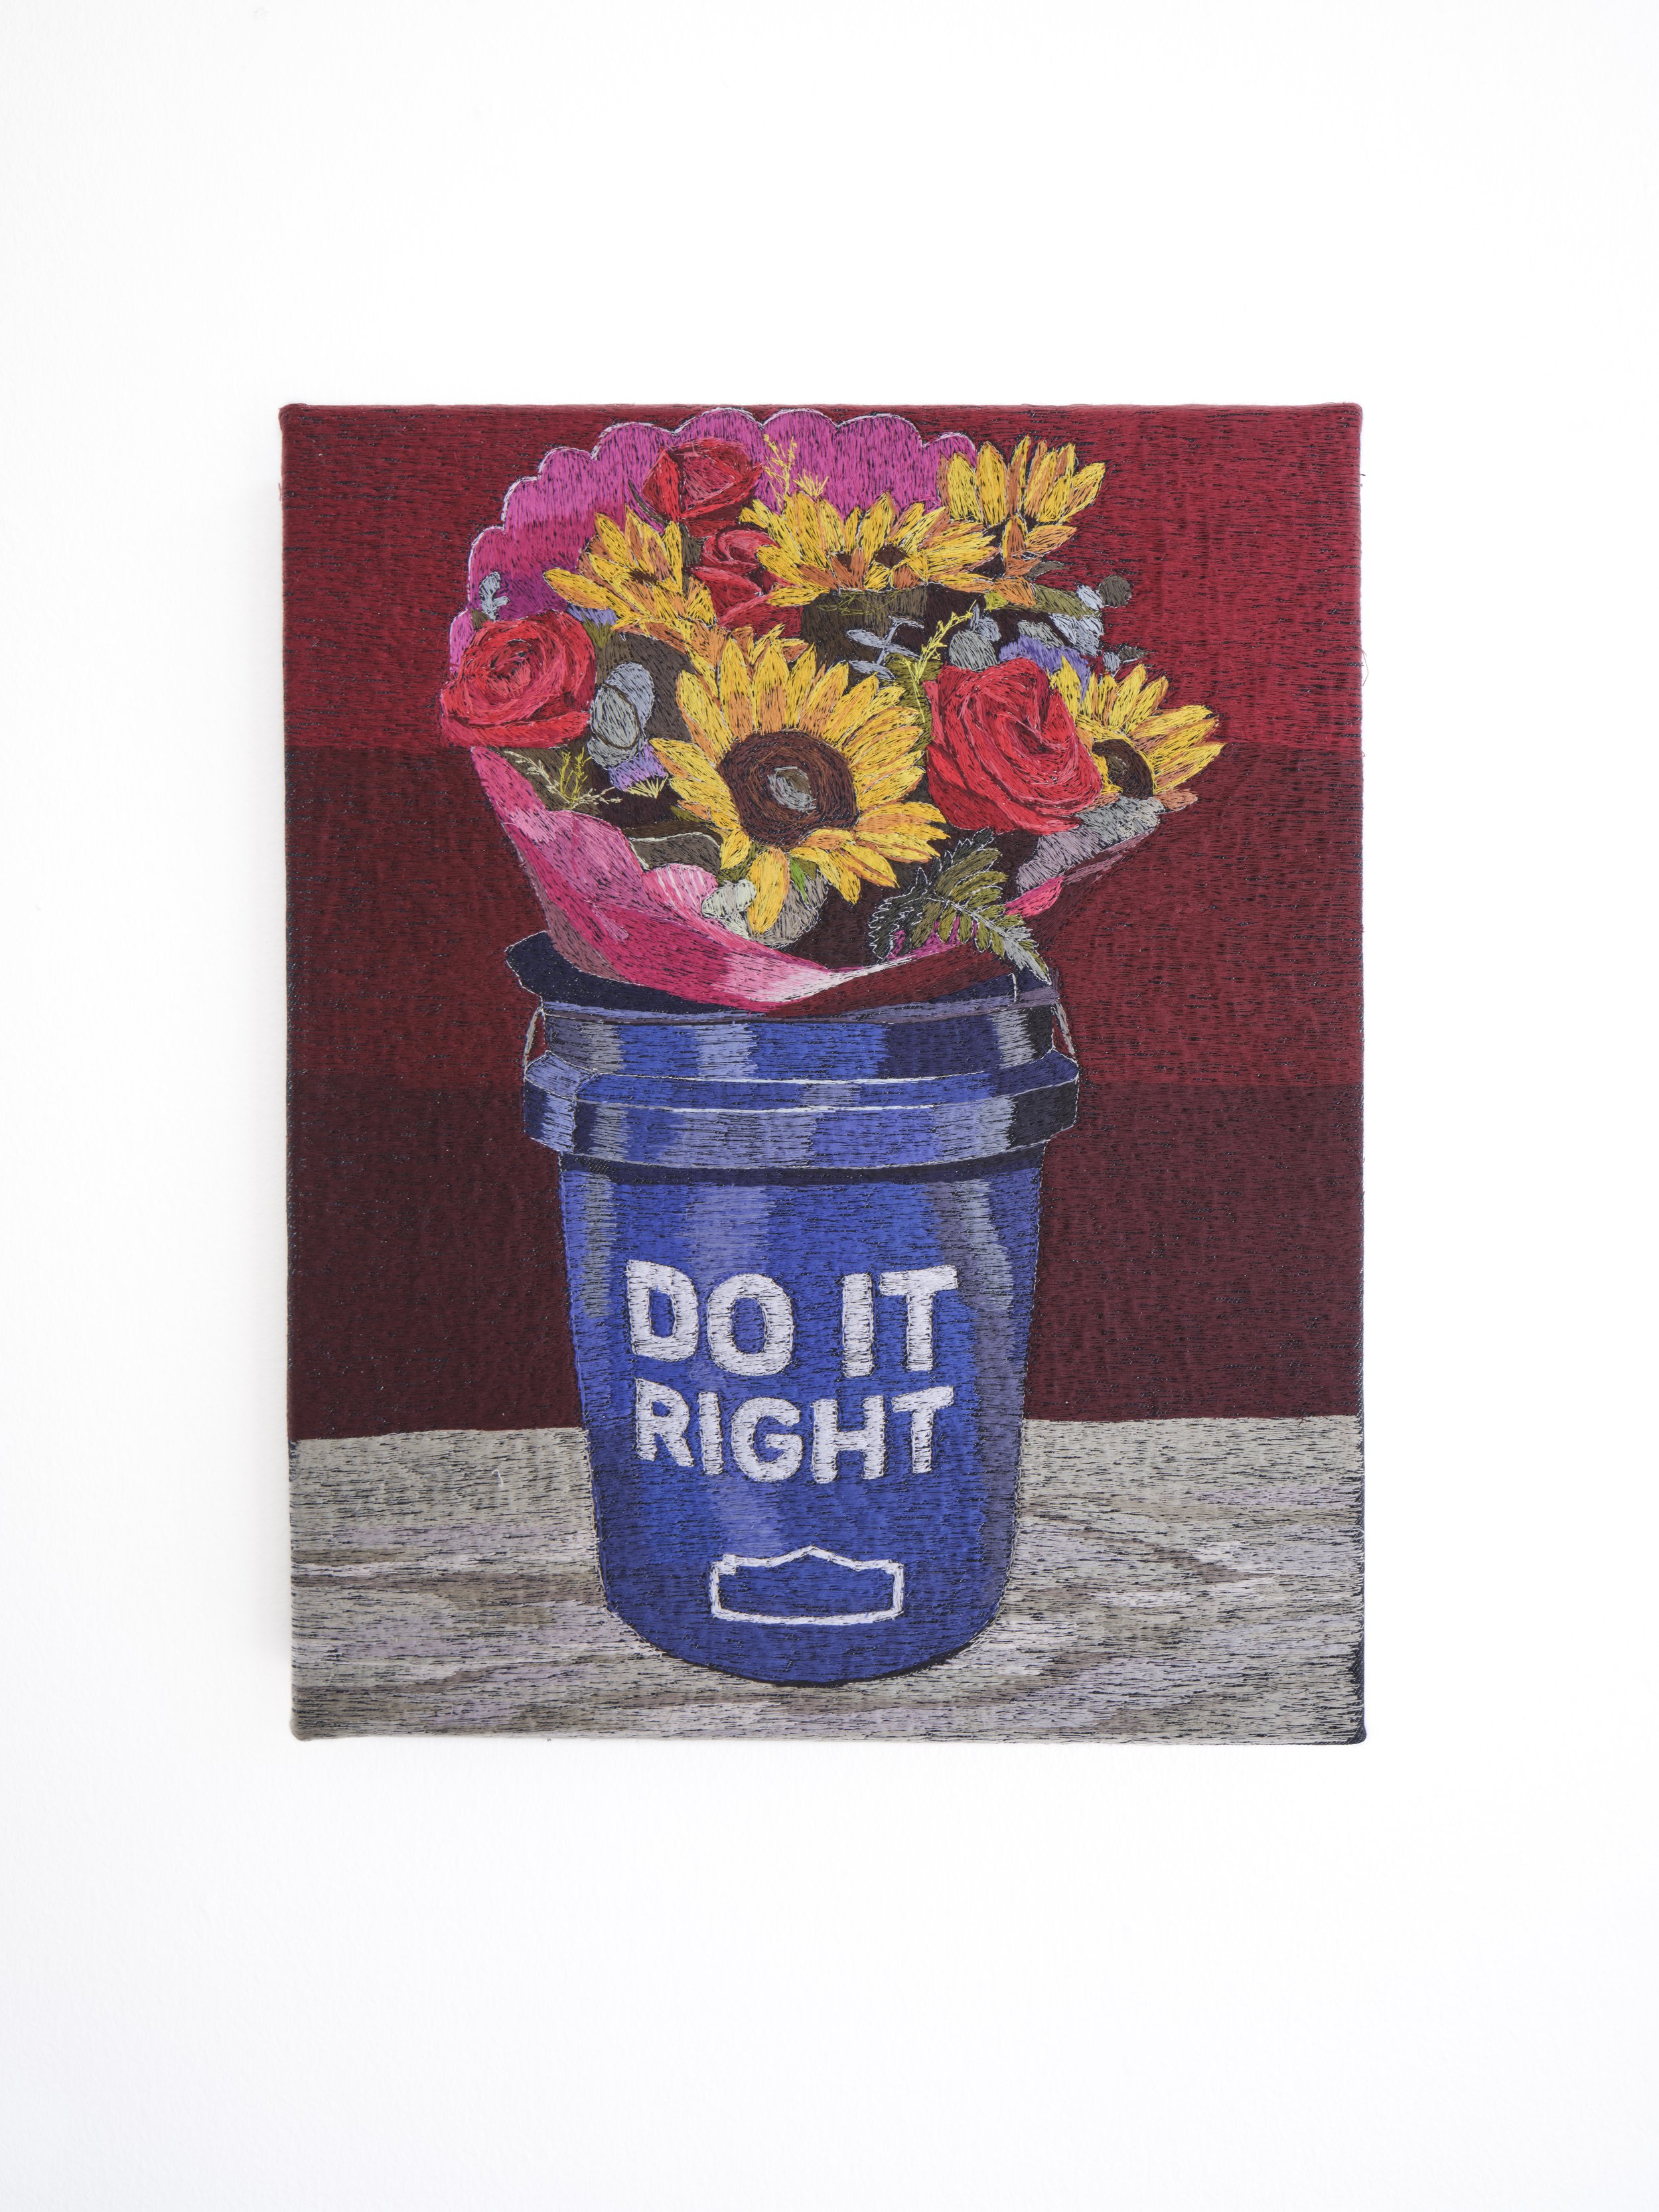   Street Flowers (do it right)   Polyester thread on denim   16 x 20 inches  2023 